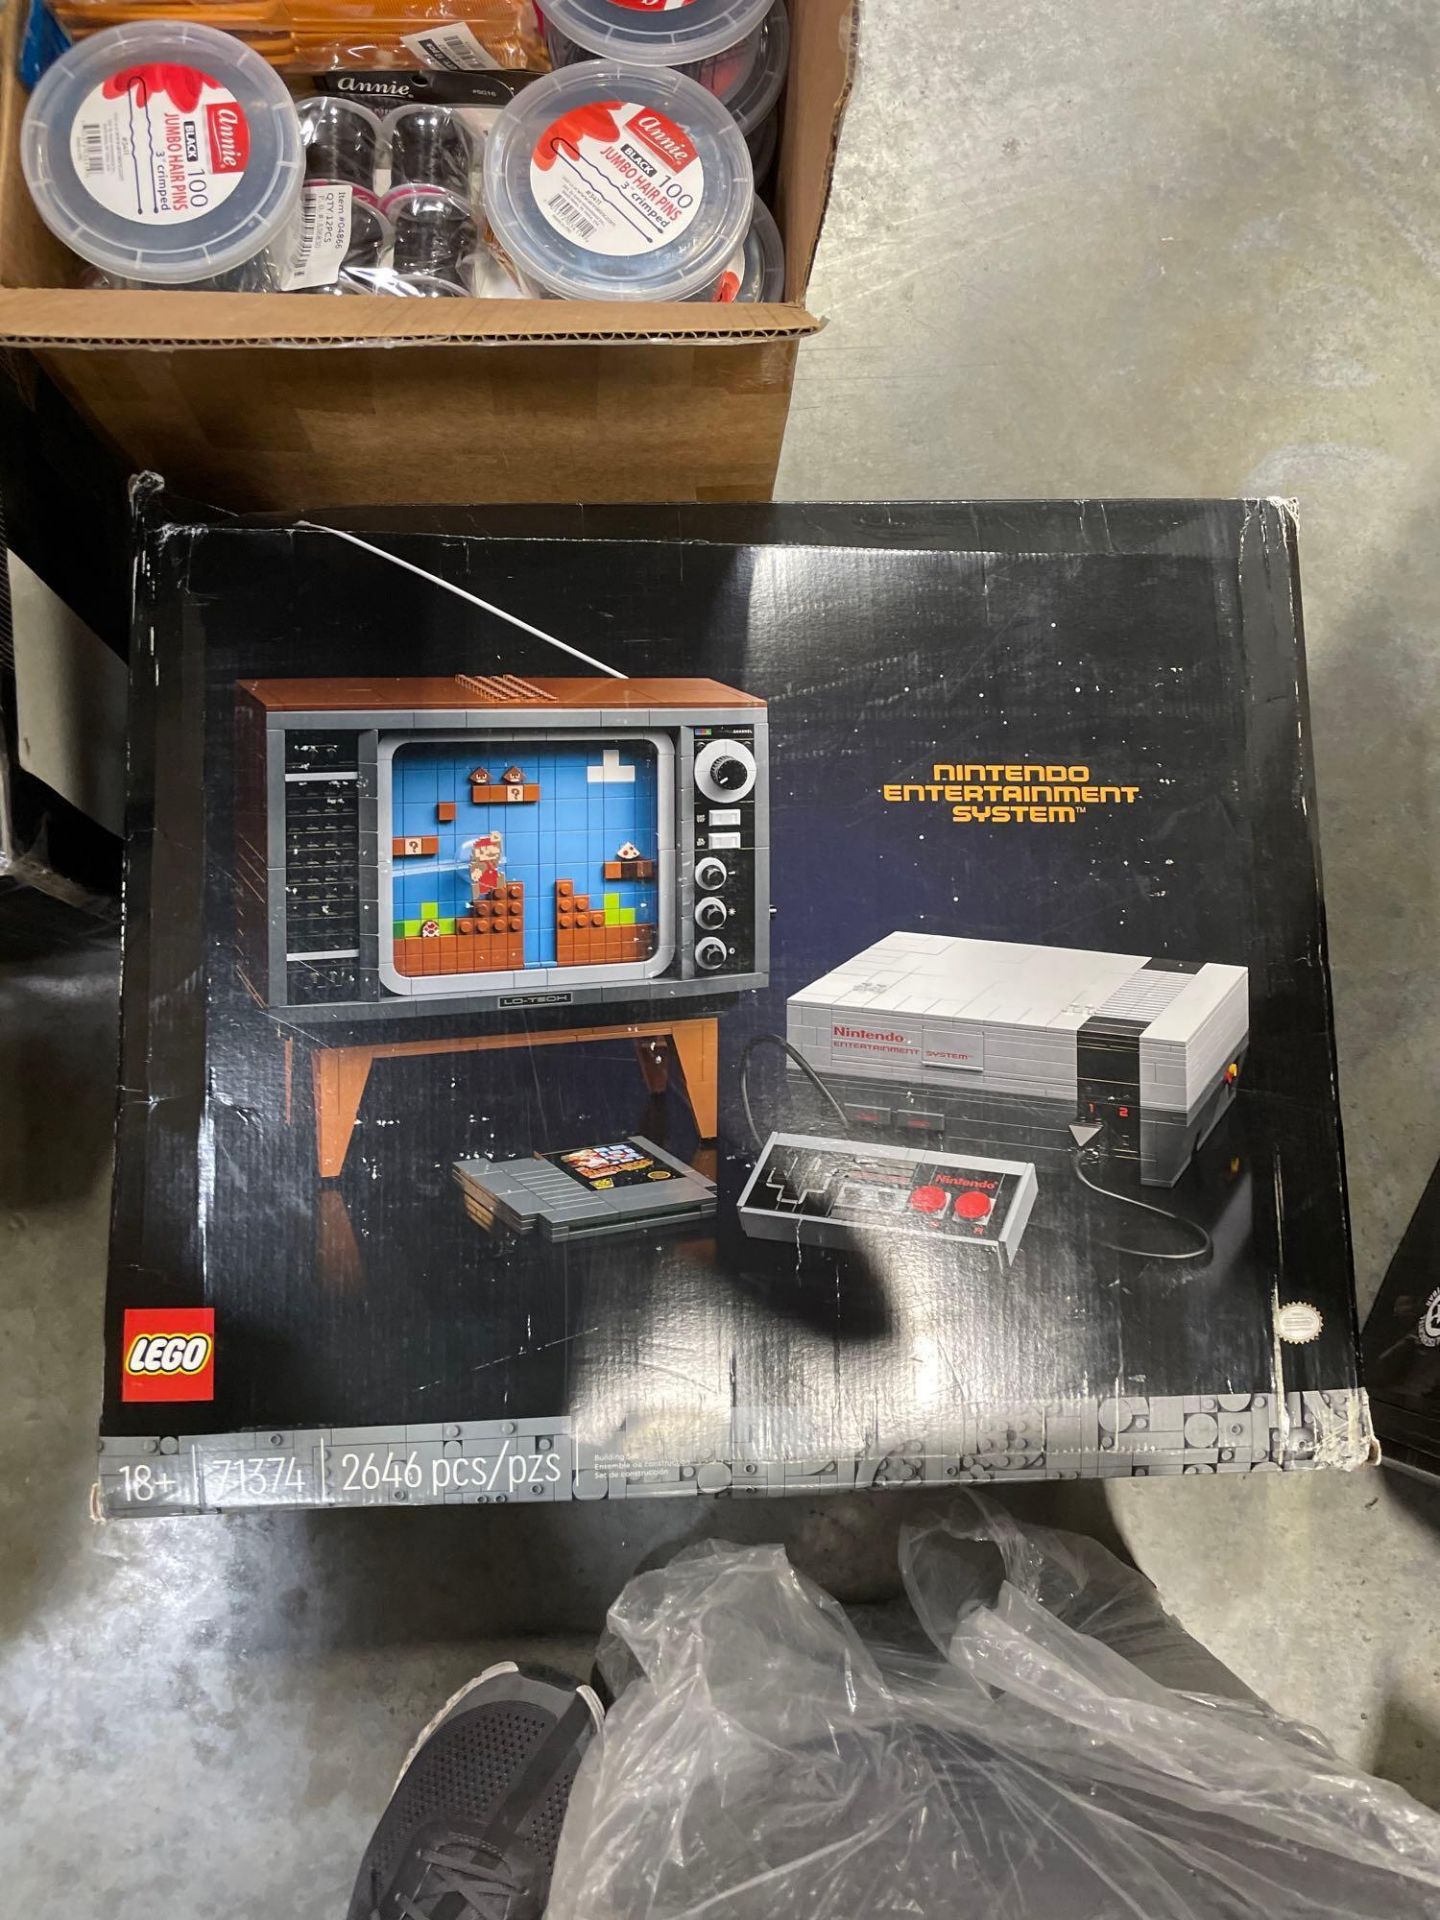 Lego, Pokemon Cards, The Dark Night Rises game and more - Image 11 of 18